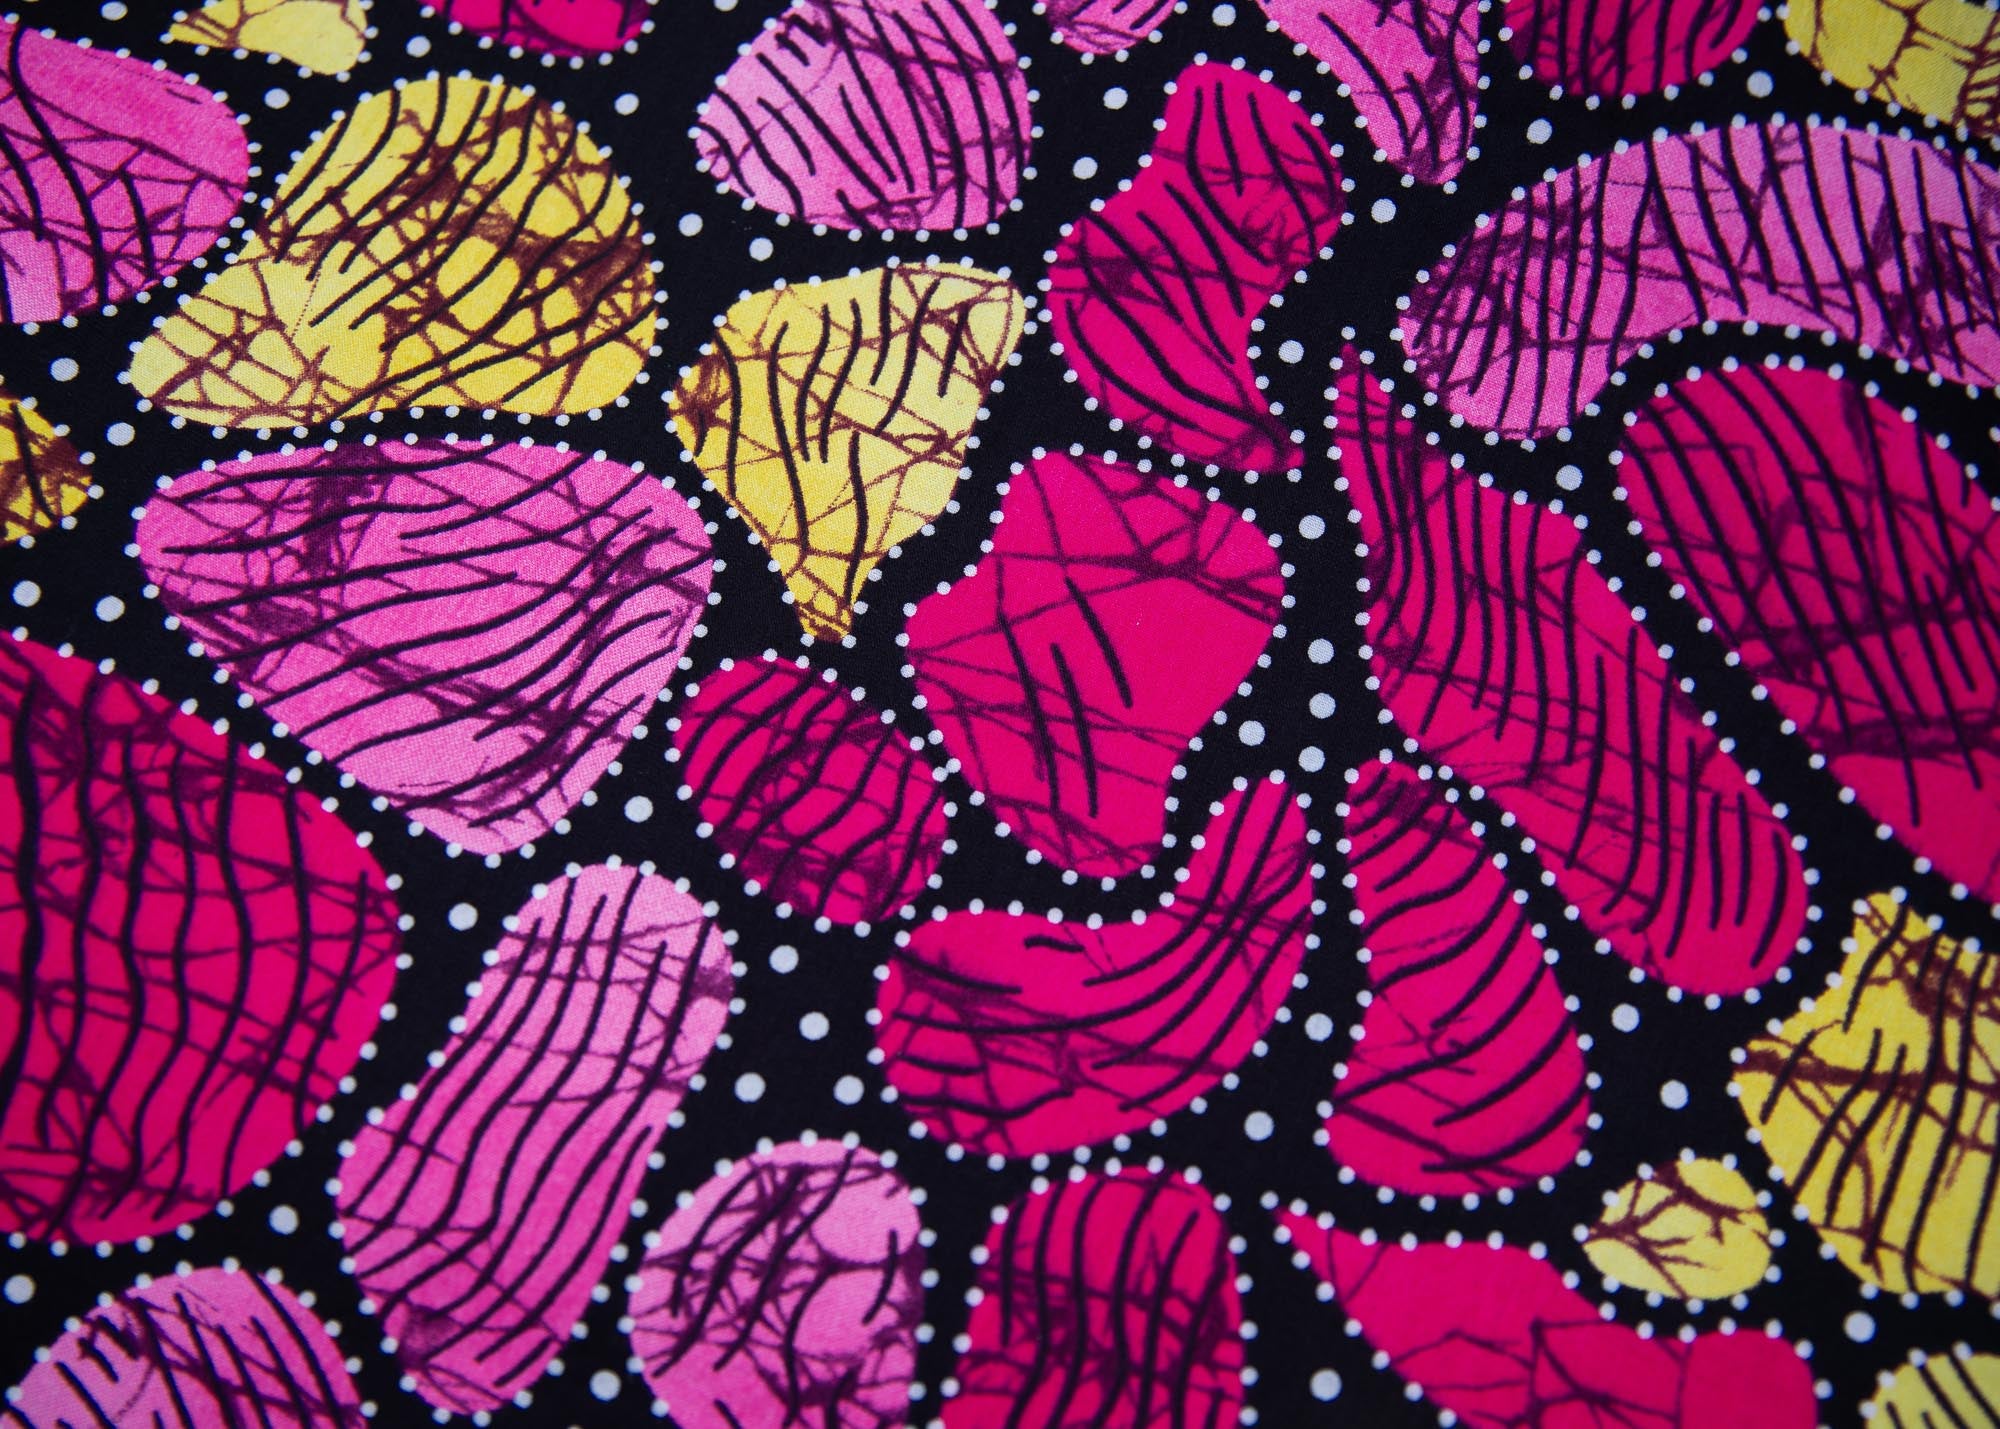 Close up display of black, white, yellow, brown, pink, hot pink and purple bubble print dress